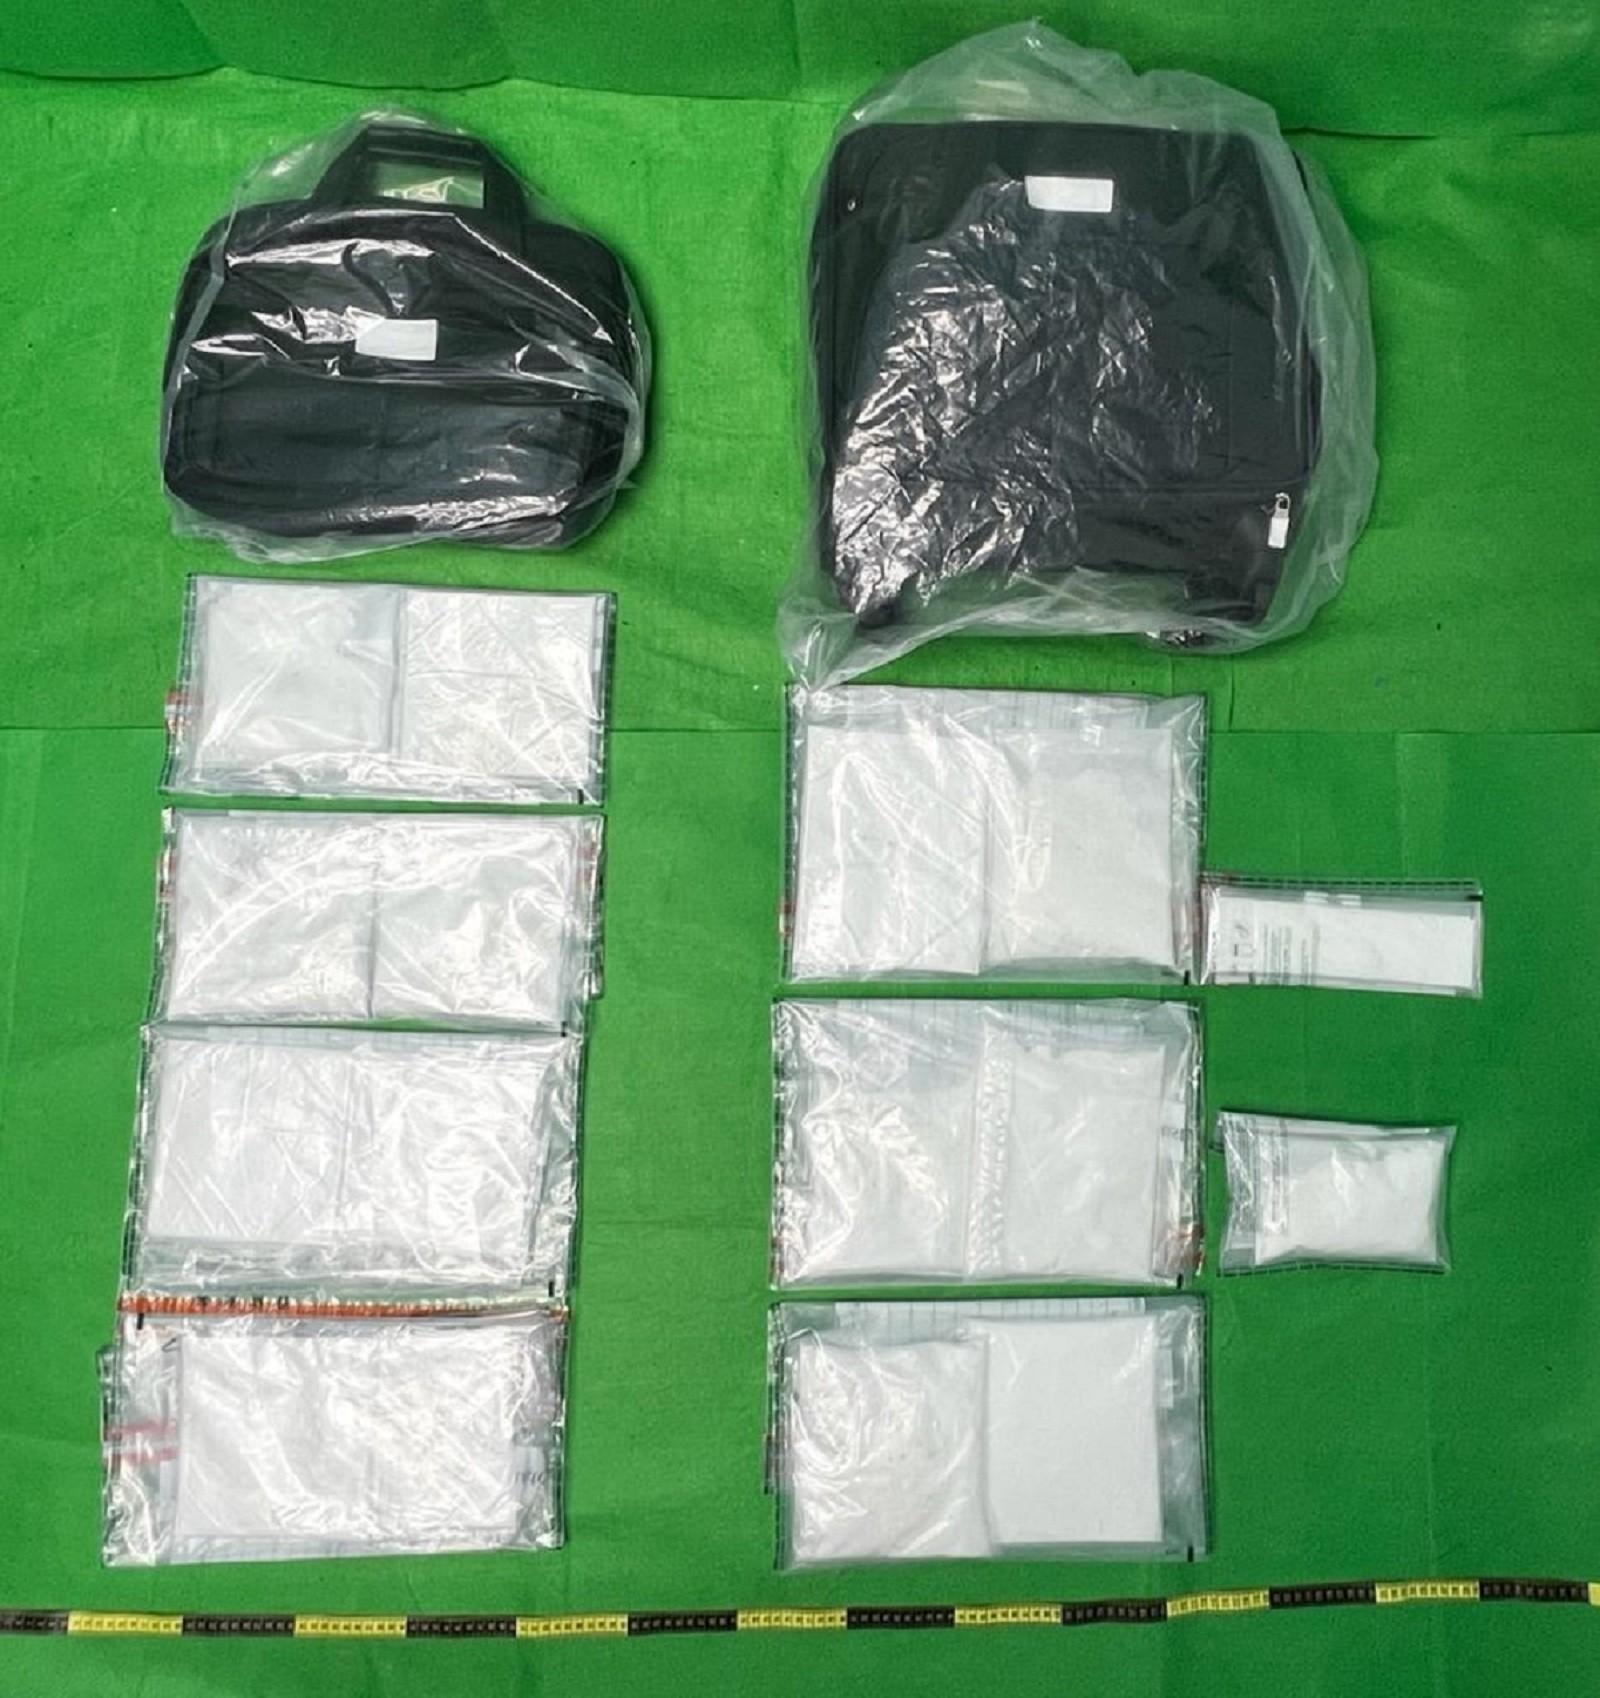 Hong Kong Customs yesterday (May 23) seized about 4.2 kilograms of suspected cocaine with an estimated market value of about $4.6 million at Hong Kong International Airport. Photo shows the suspected cocaine seized.